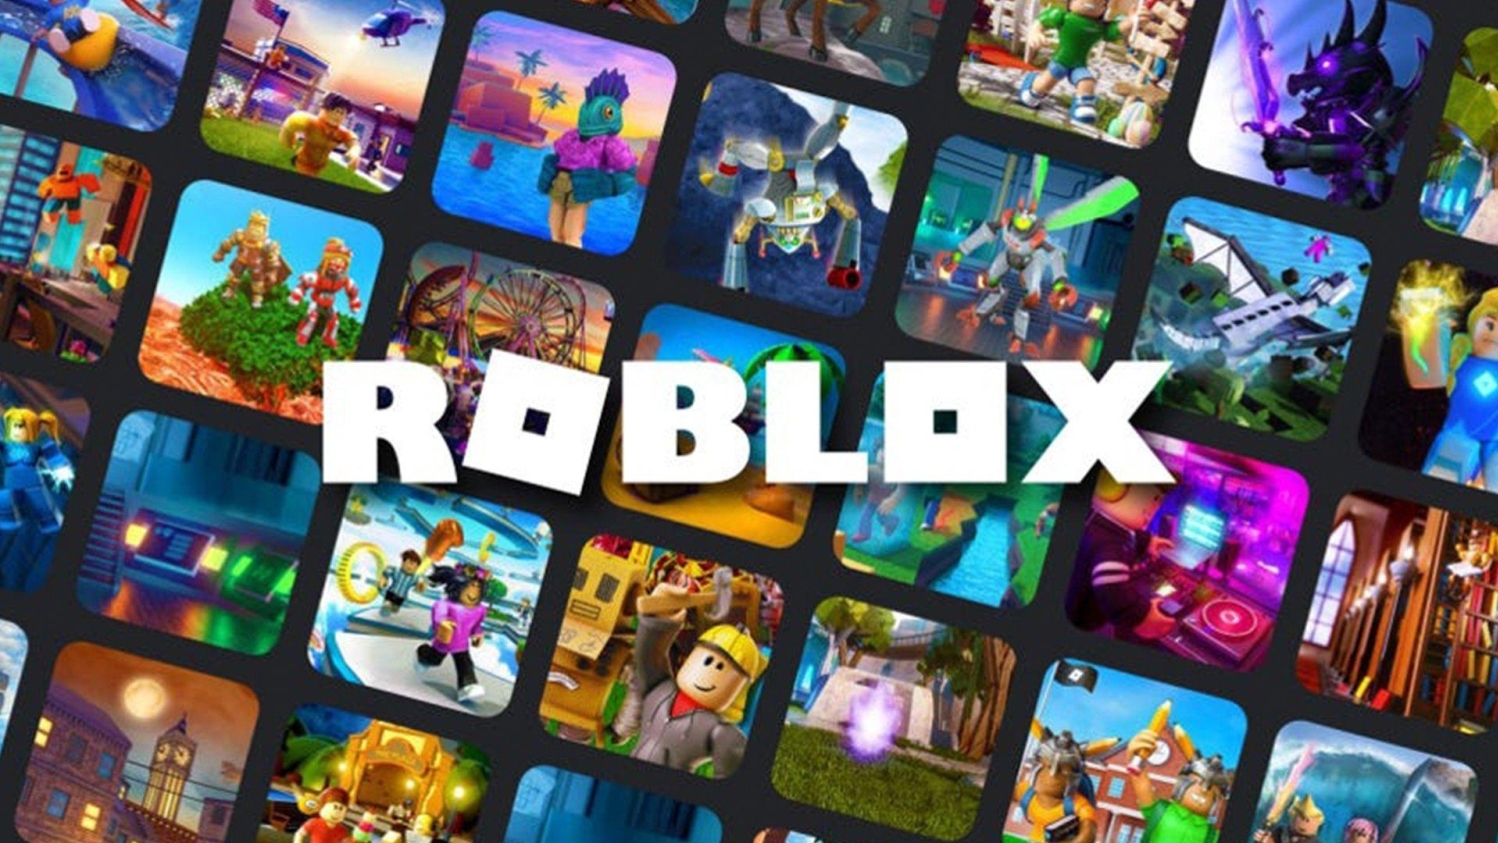 Roblox is finally making its way to PlayStation consoles